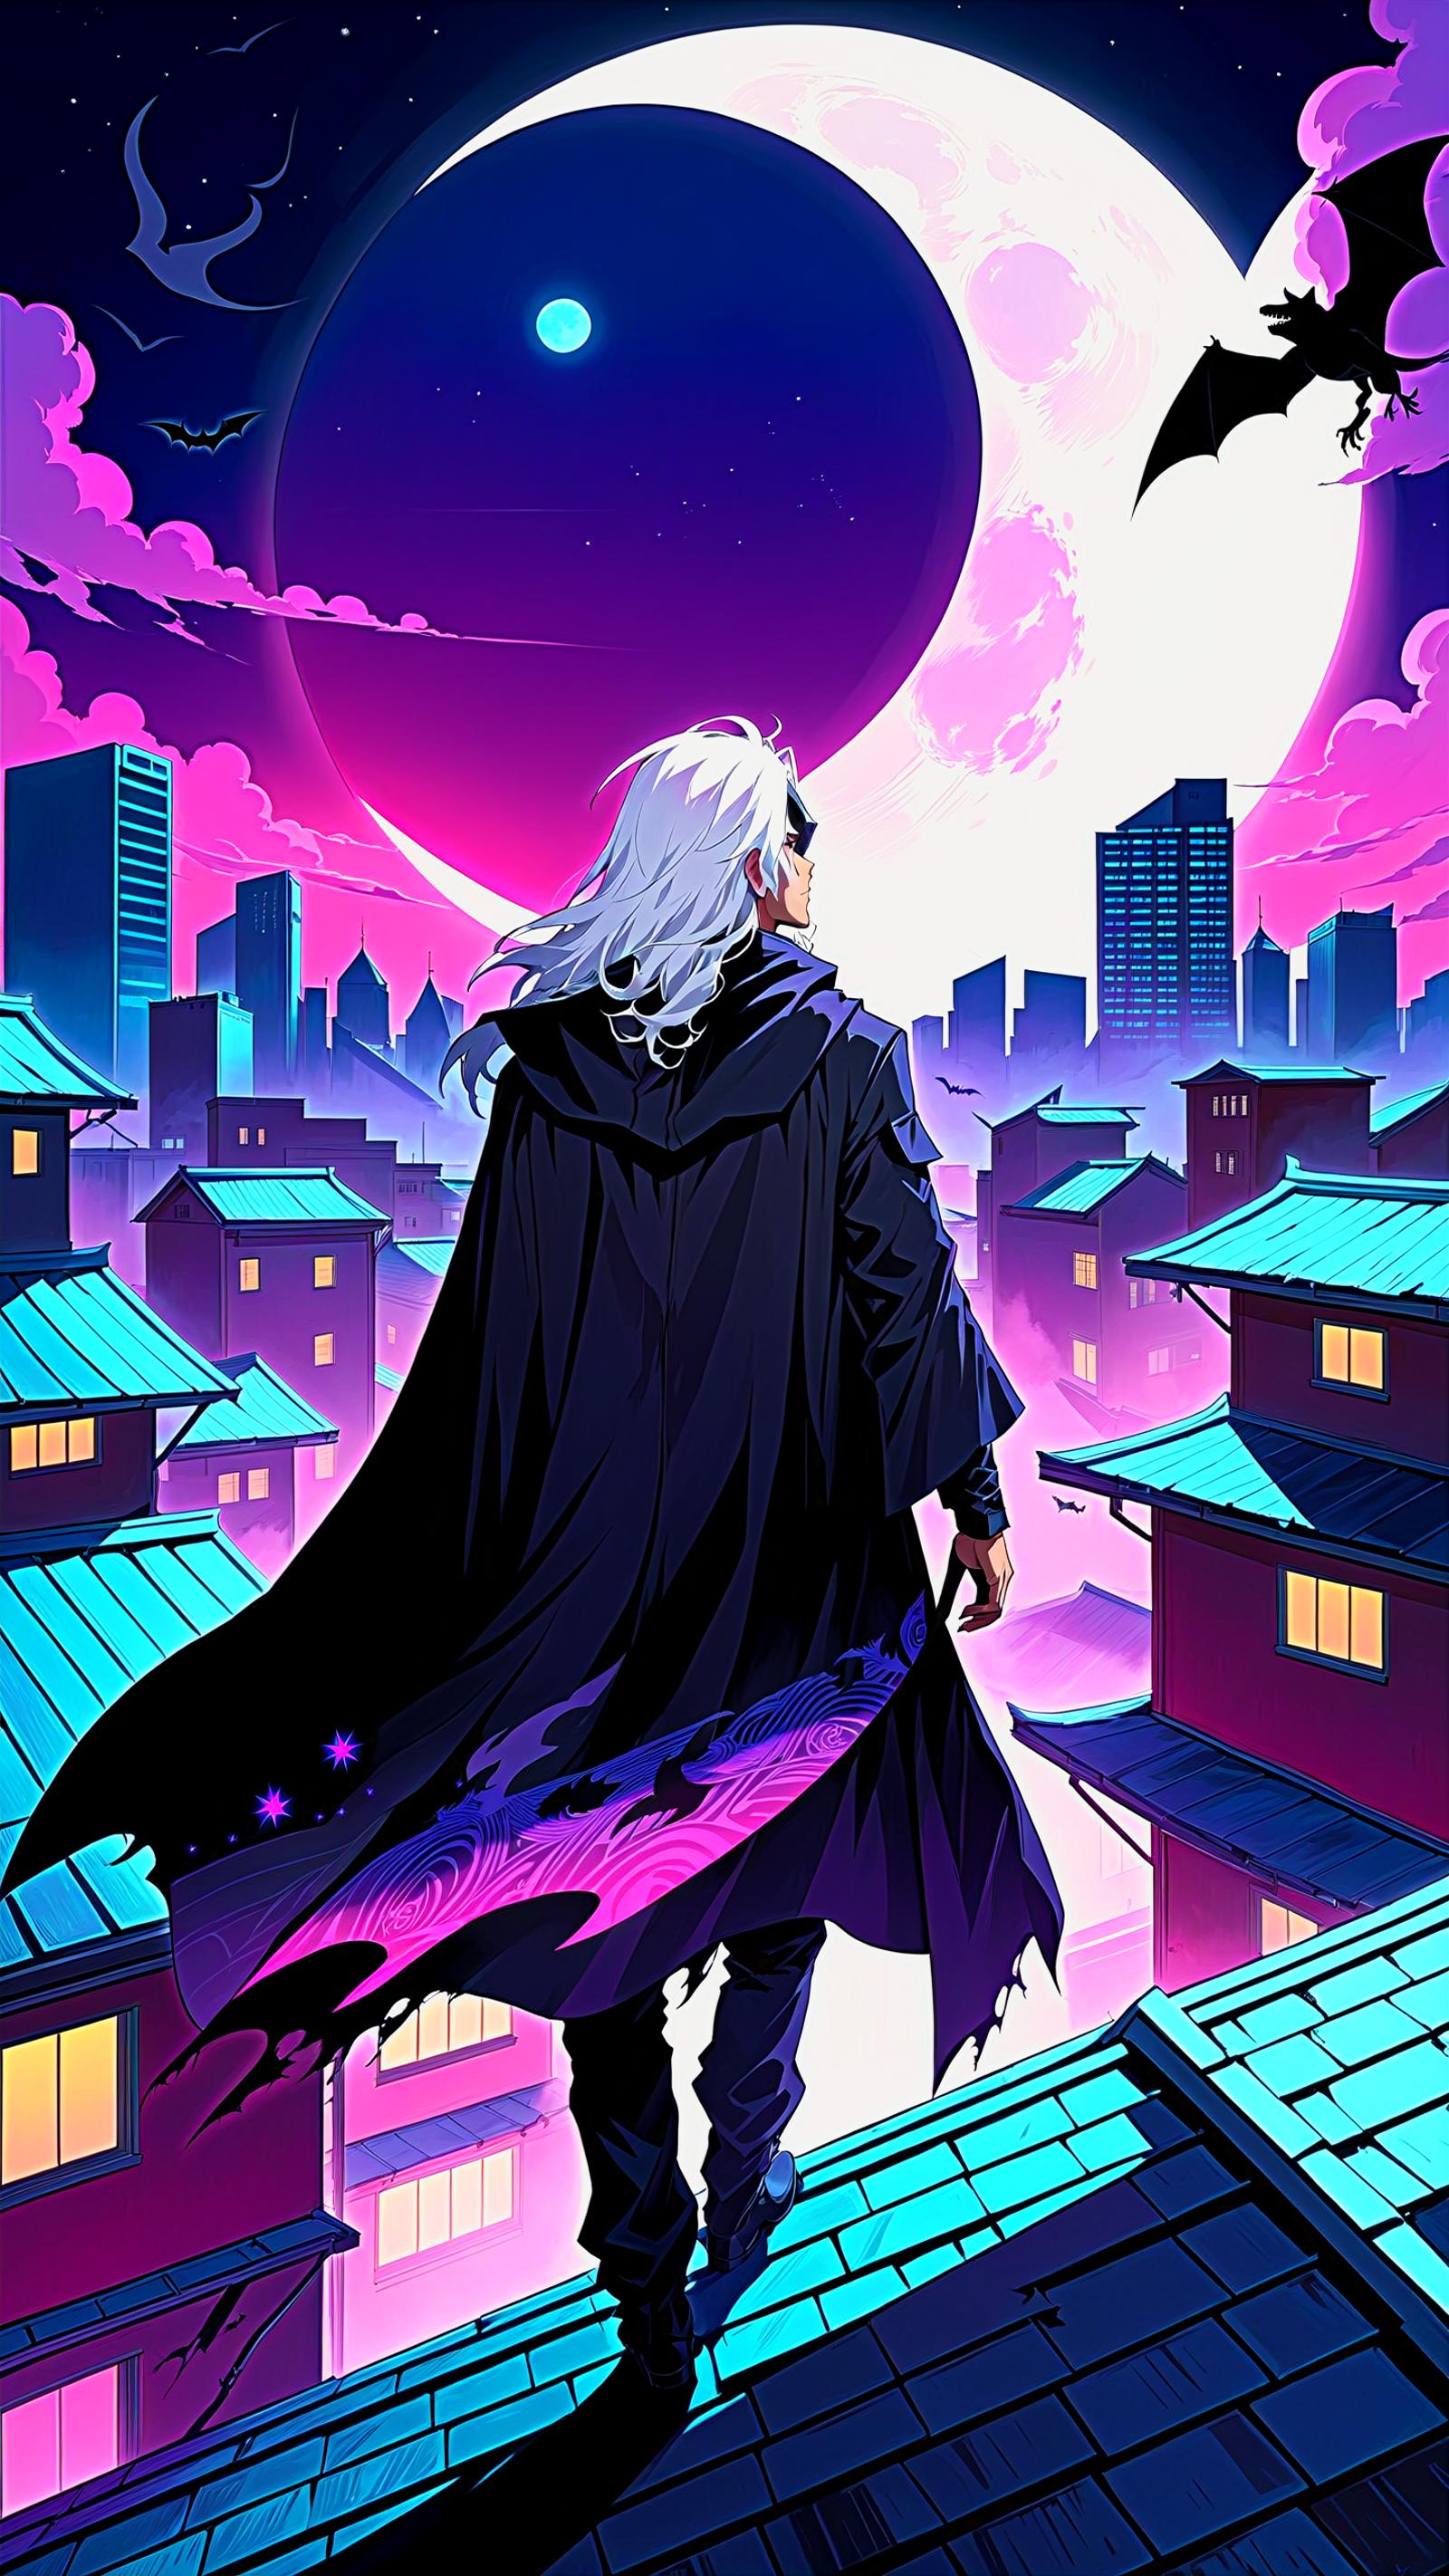 A man dressed in black with a sword standing on a rooftop.